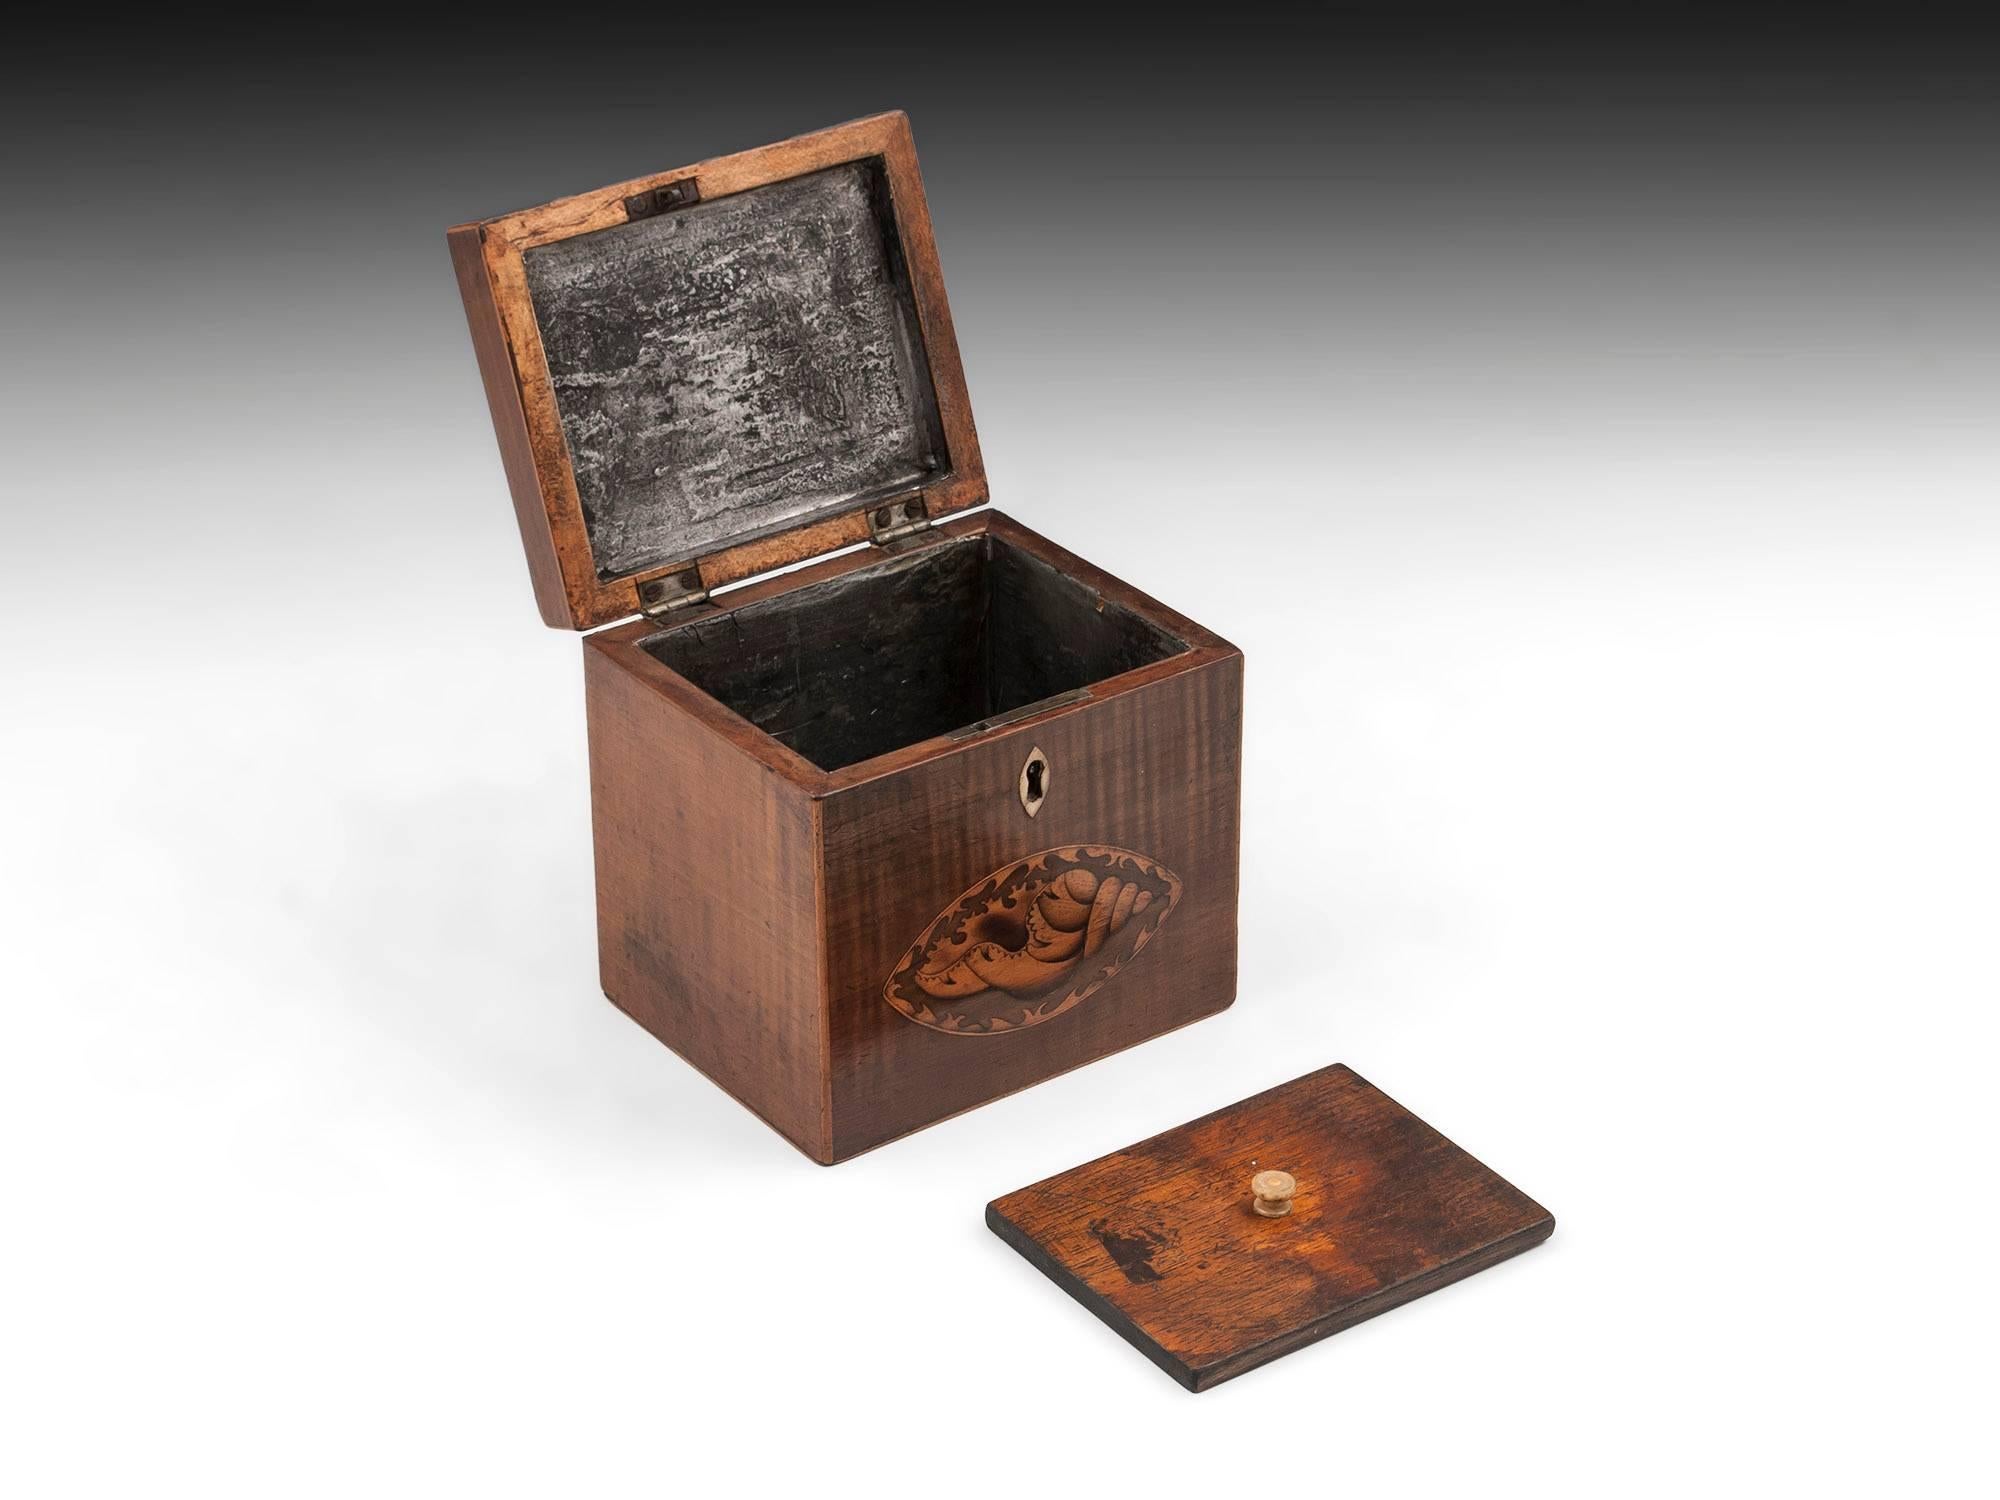 Harewood Antique Single Wooden Tea Caddy with Conch Shells, 18th Century In Good Condition For Sale In Northampton, United Kingdom